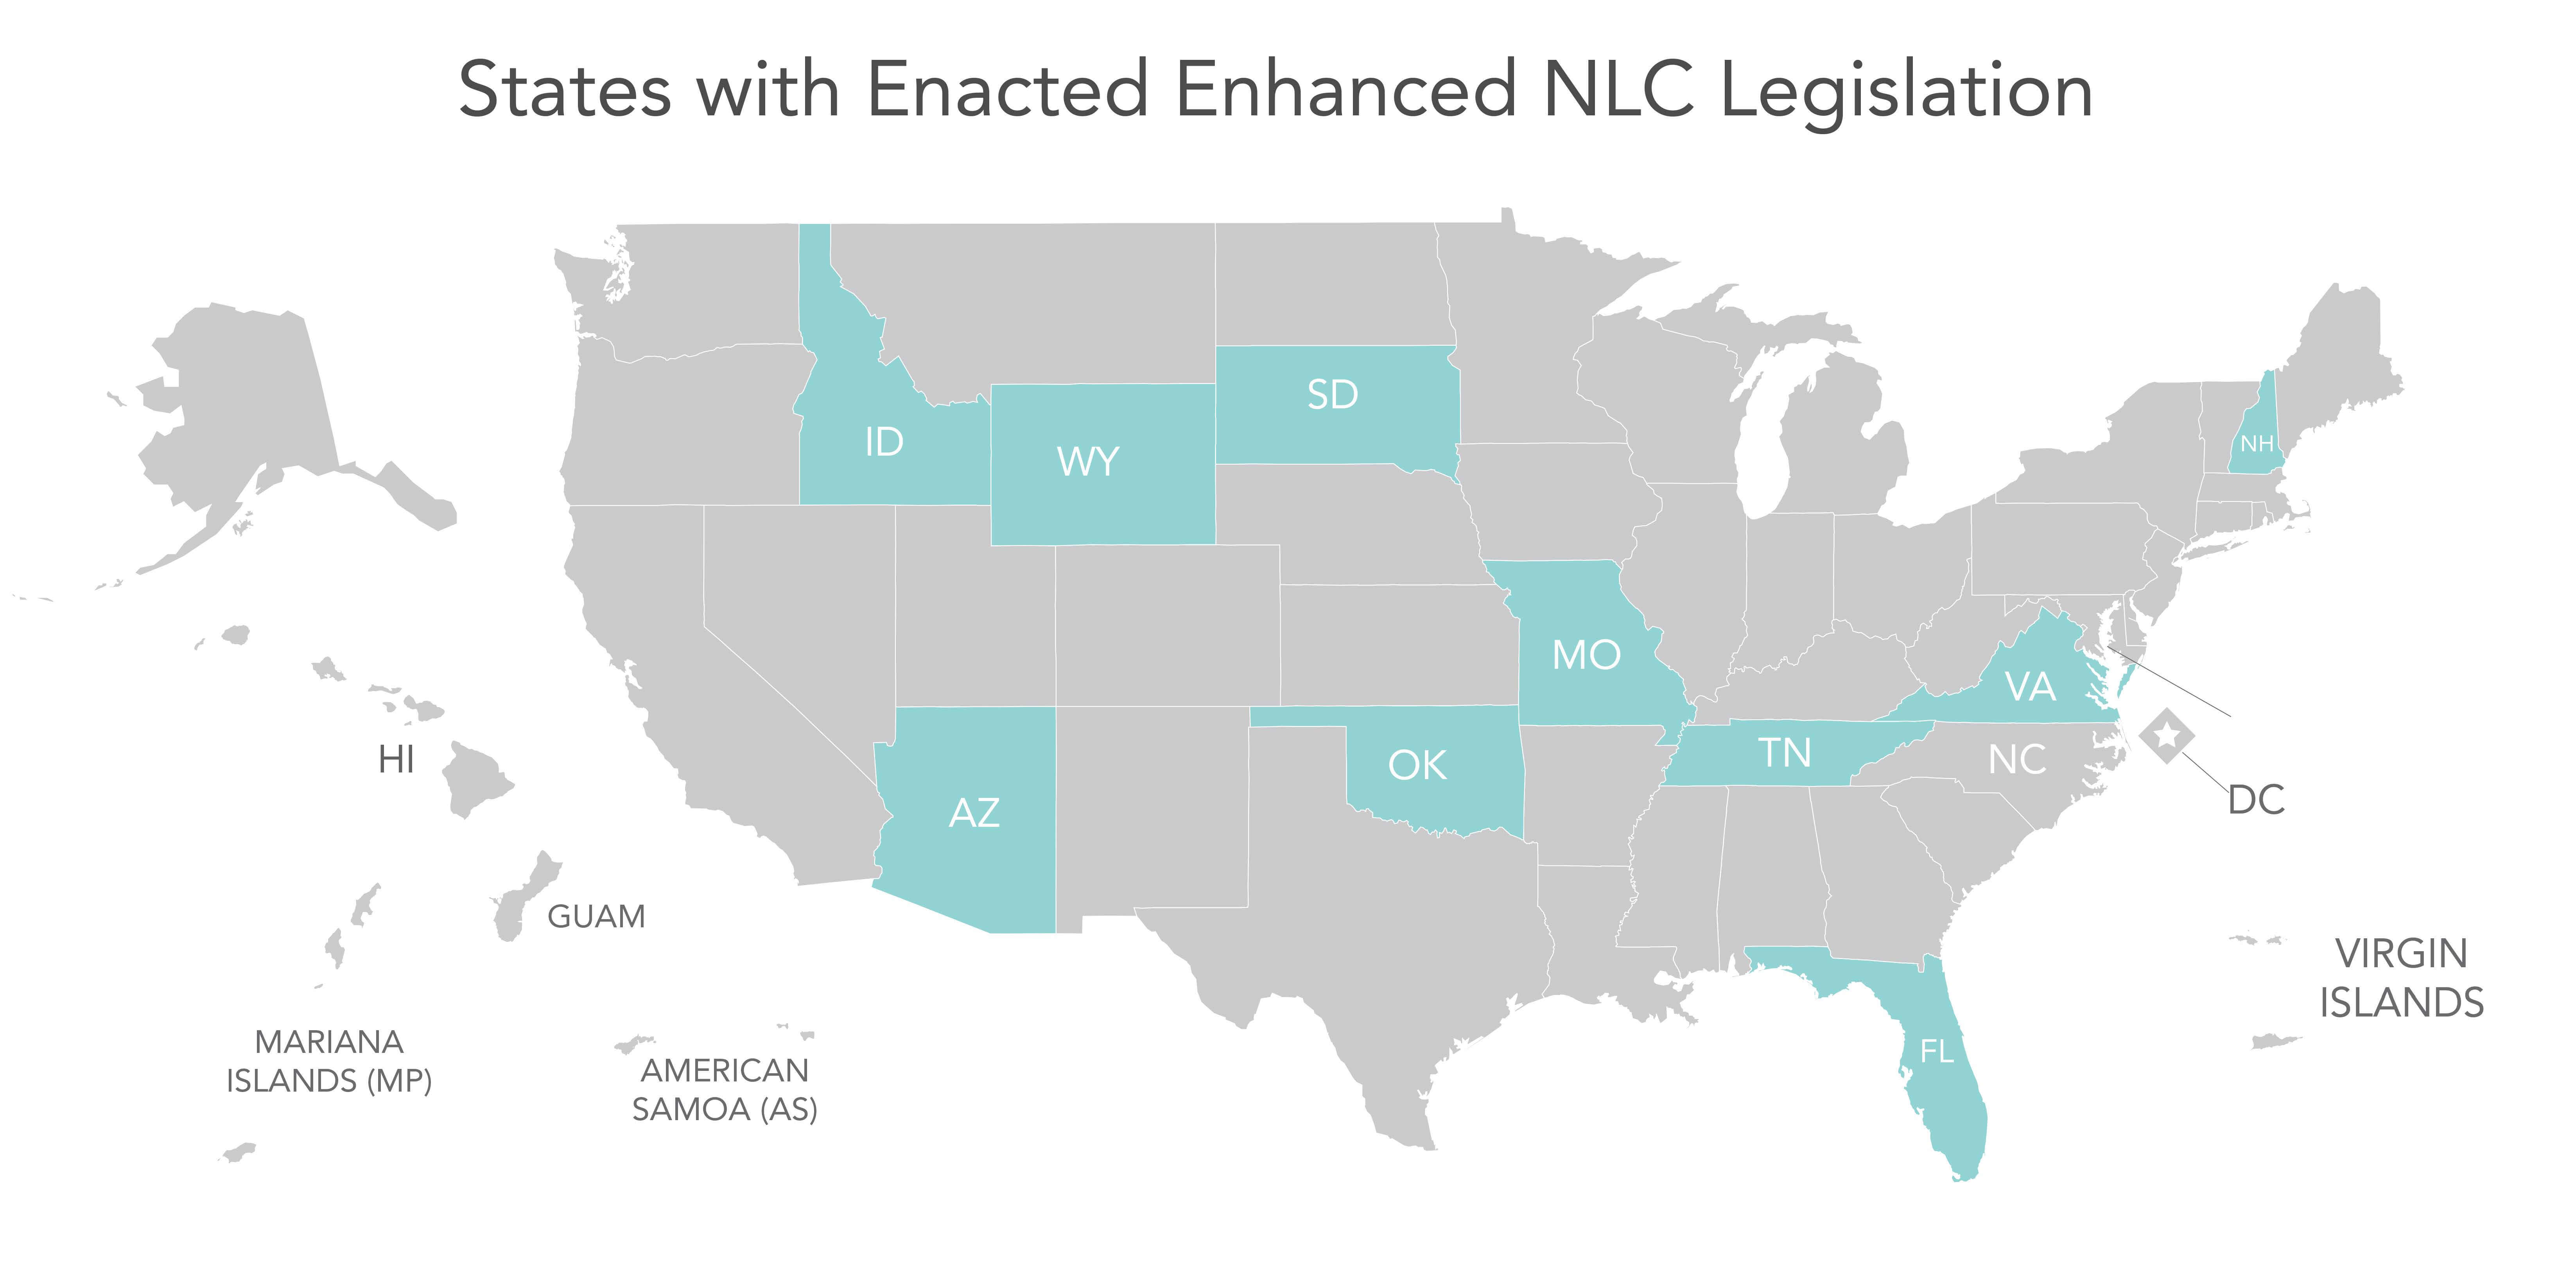 Multistate Licensure Compact And What Are Its Implications On Nursing